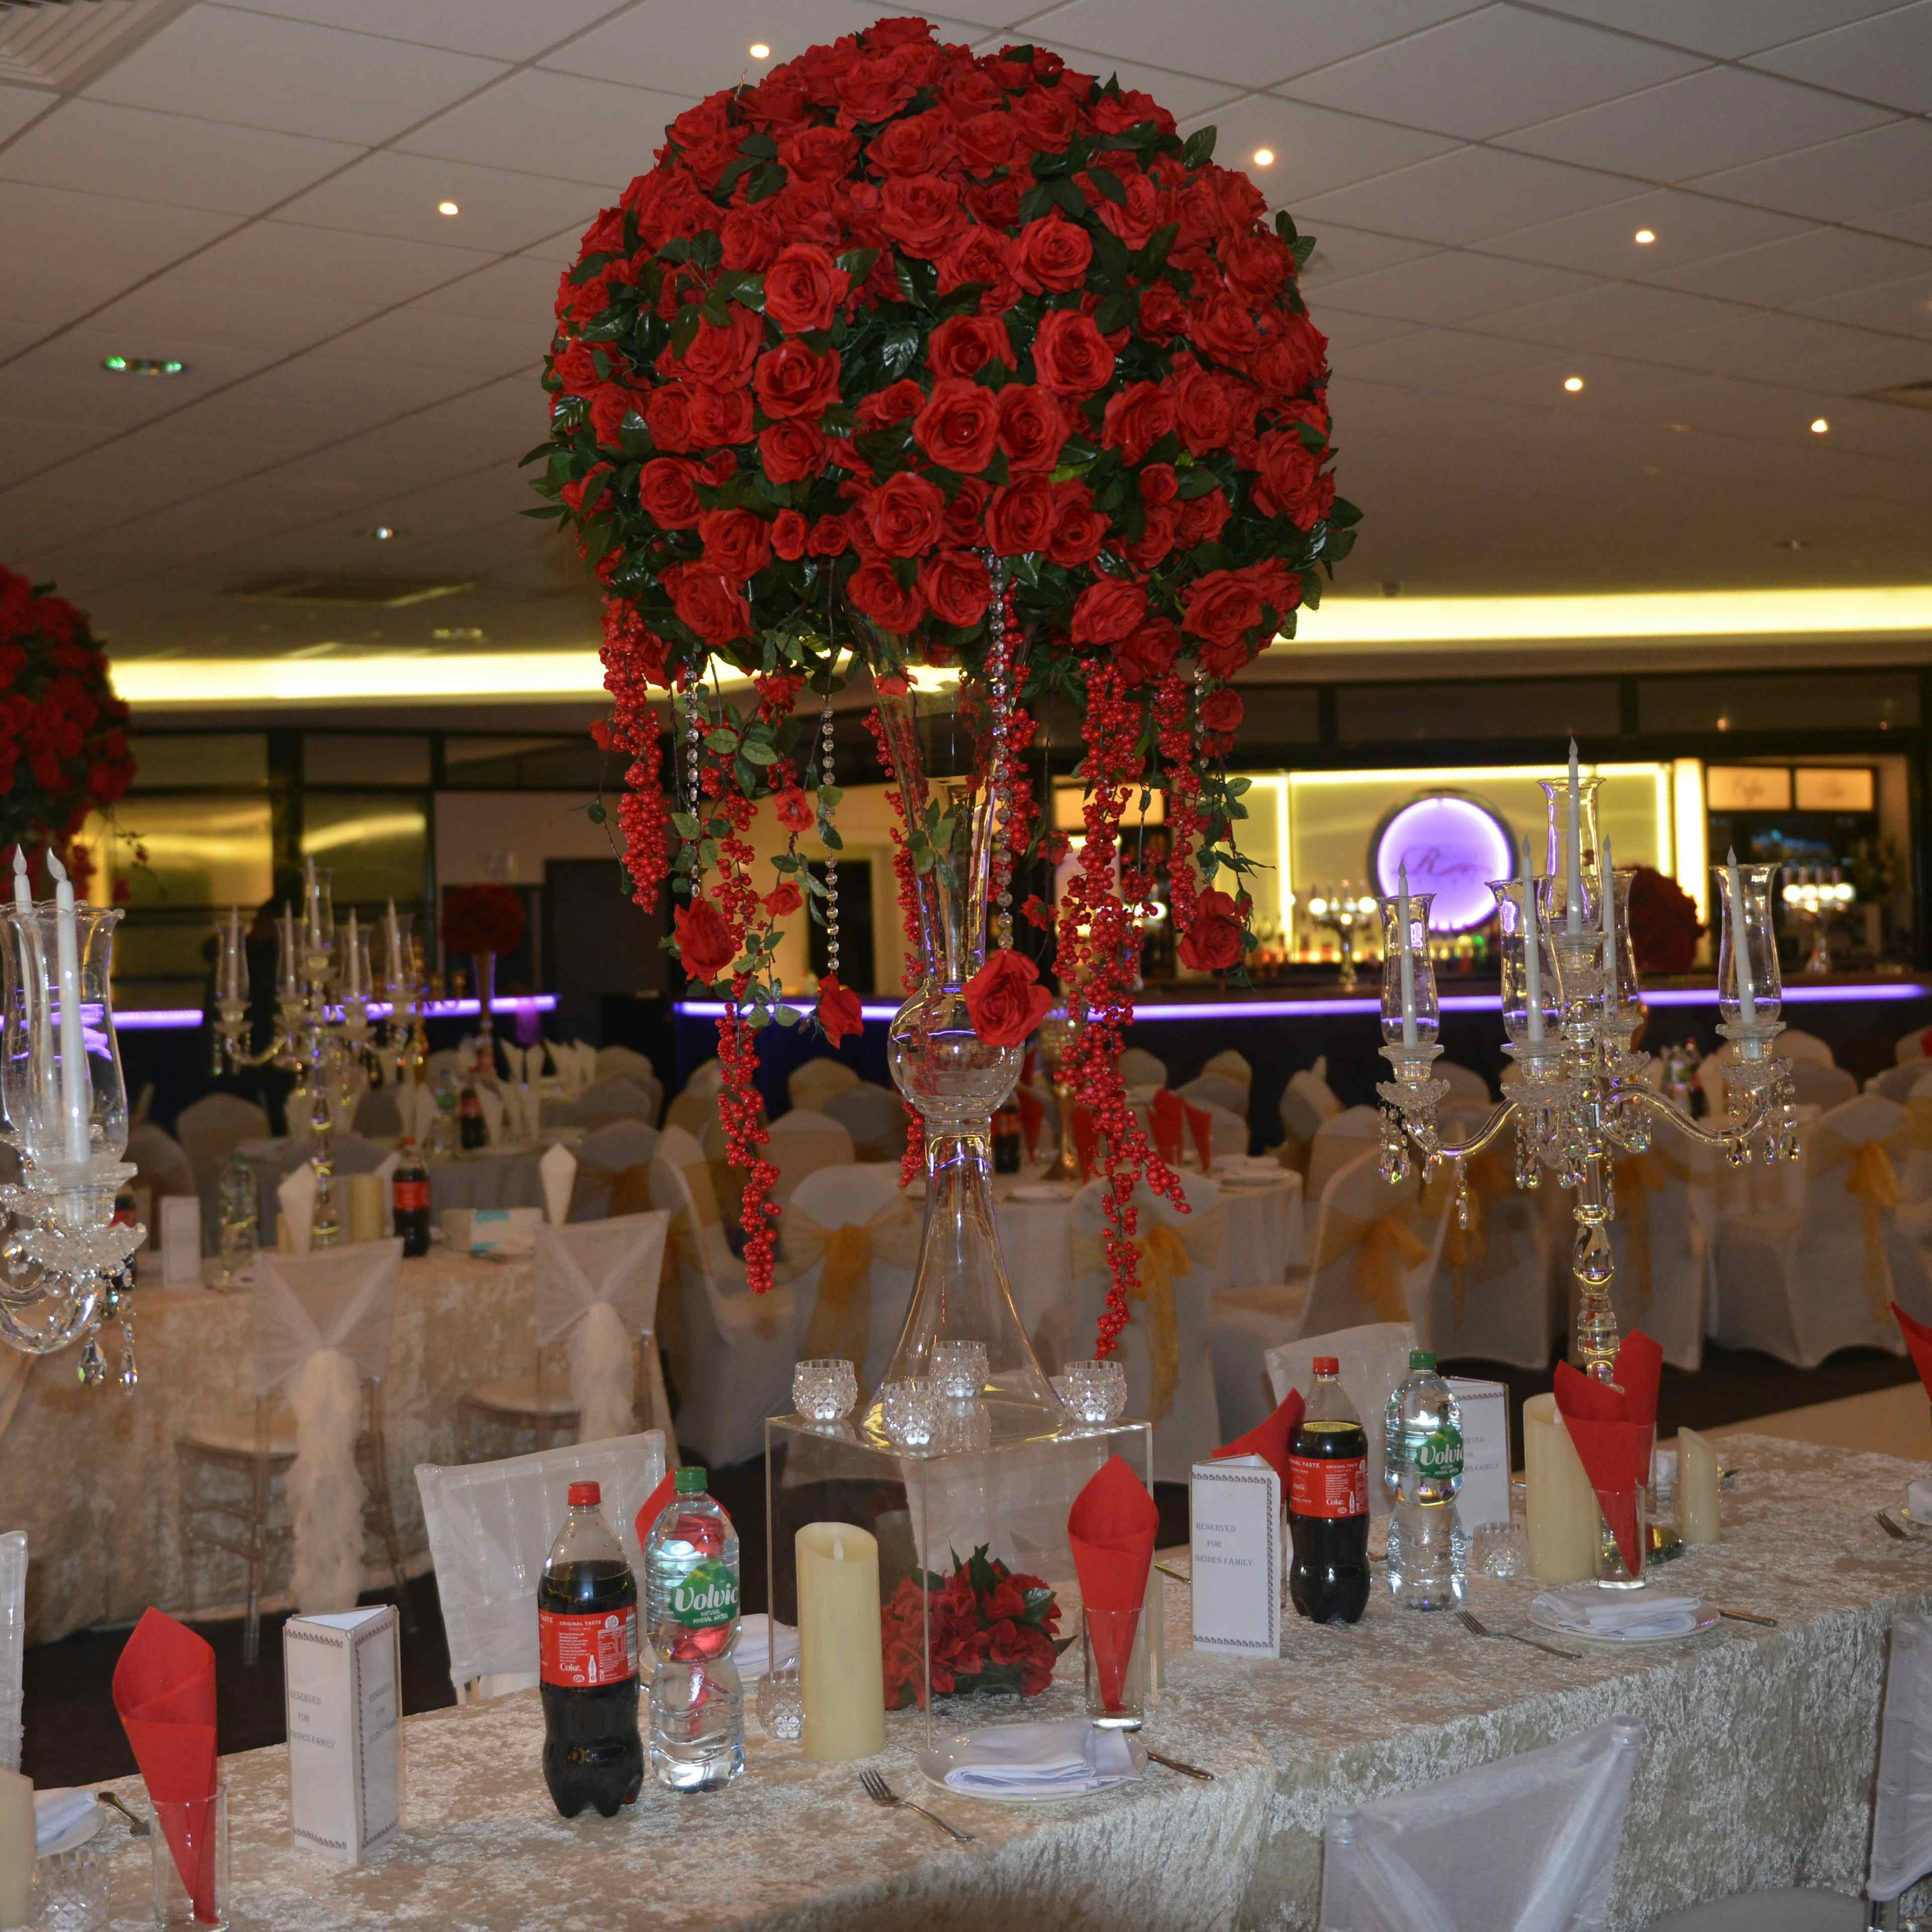 Royale Banqueting Suite  - Main hall image 2